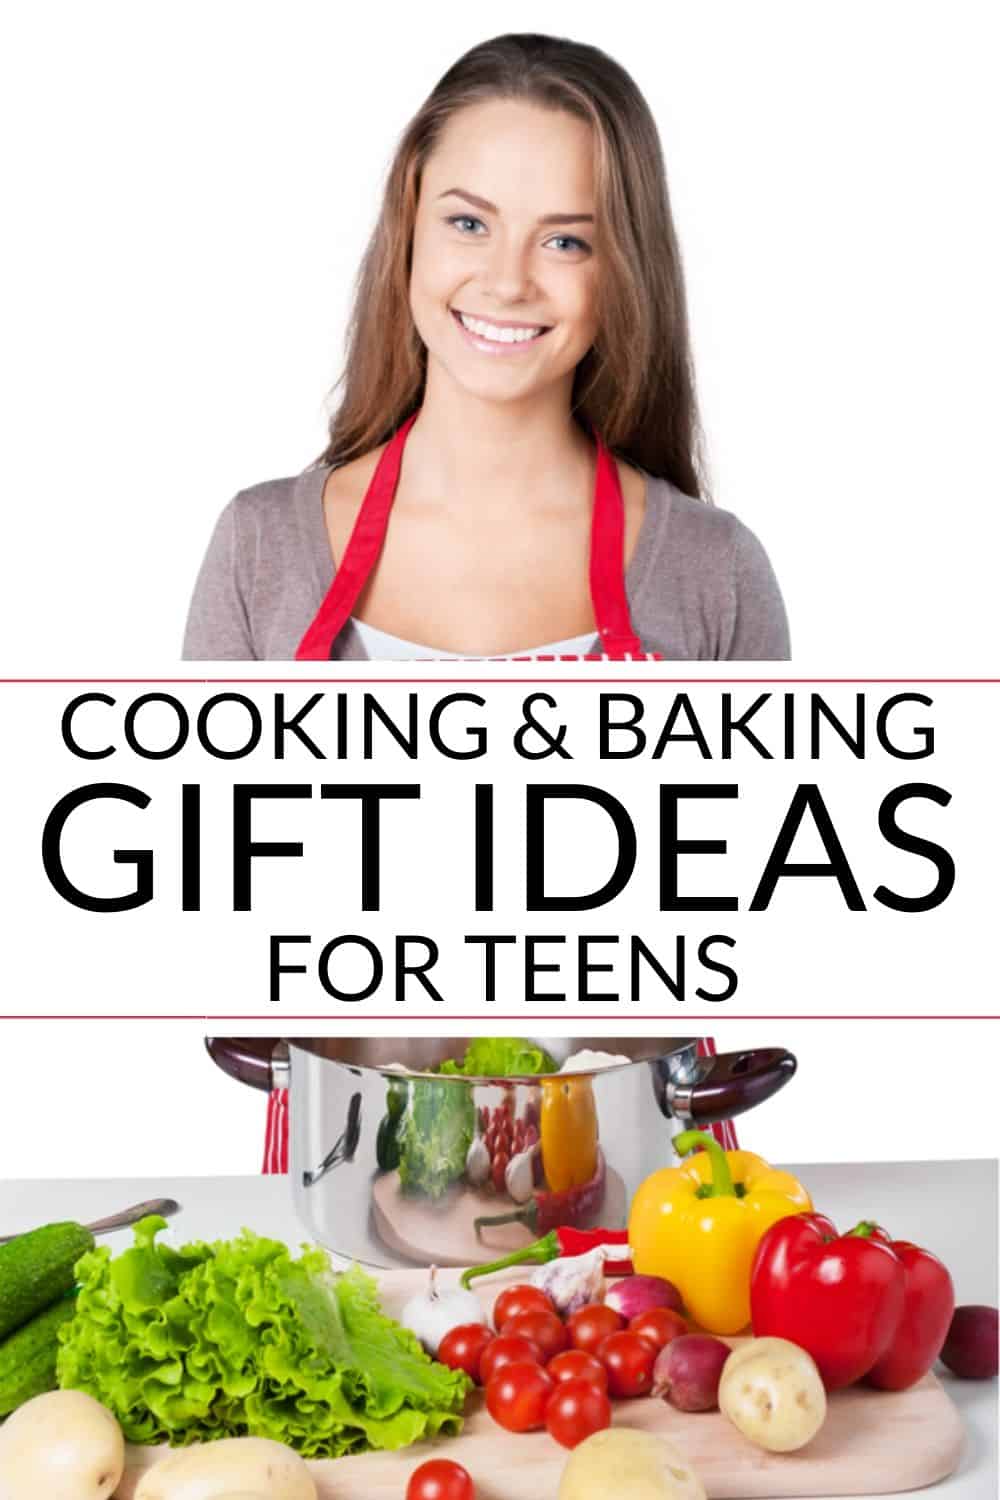 cooking gifts with a teen and vegetables